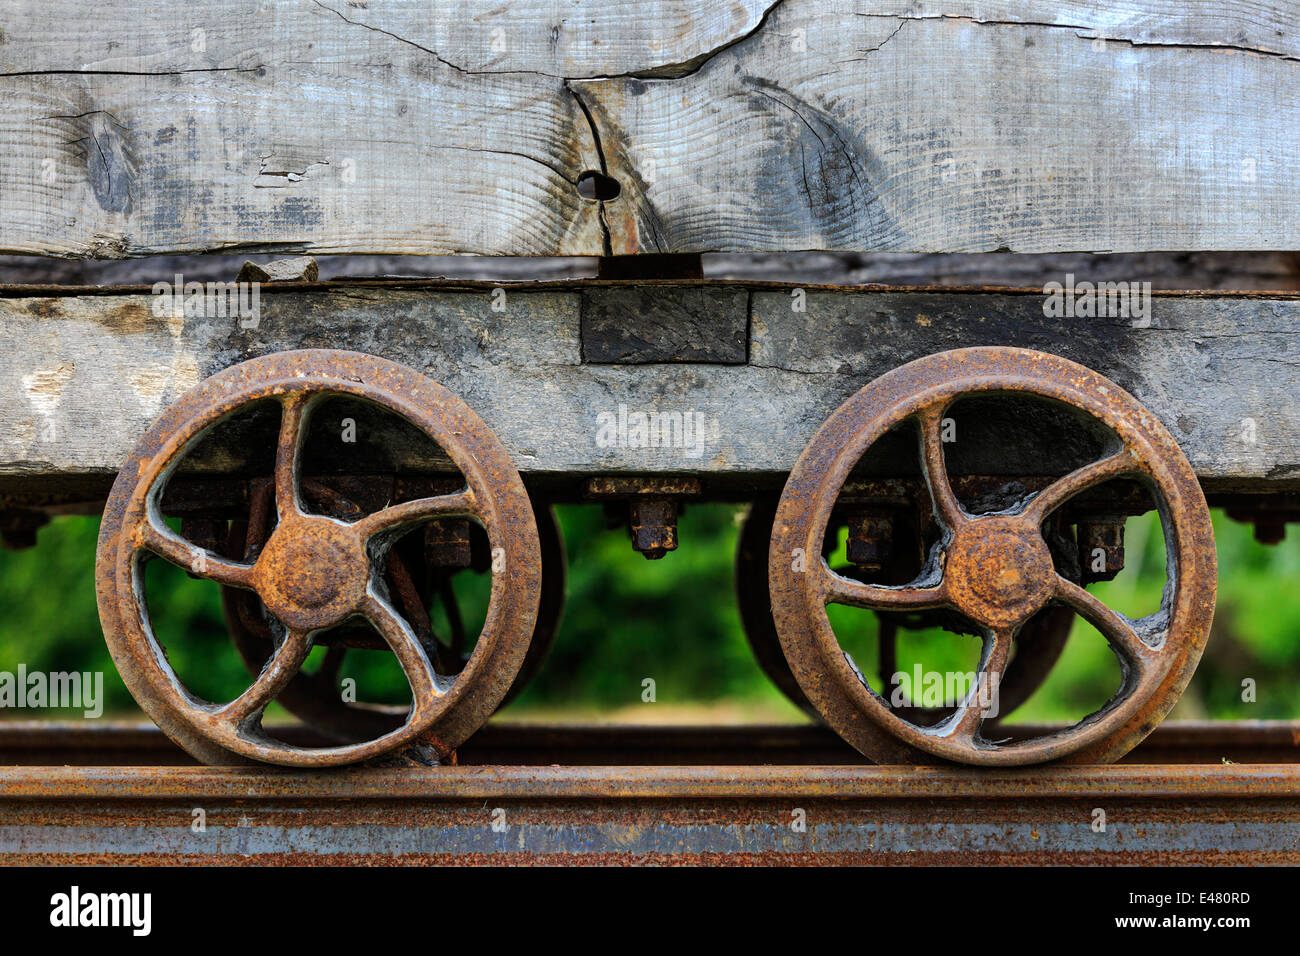 Two rusting wheels on an old and disused mining carriage, Auchinleck, Ayrshire,Scotland, UK Stock Photo